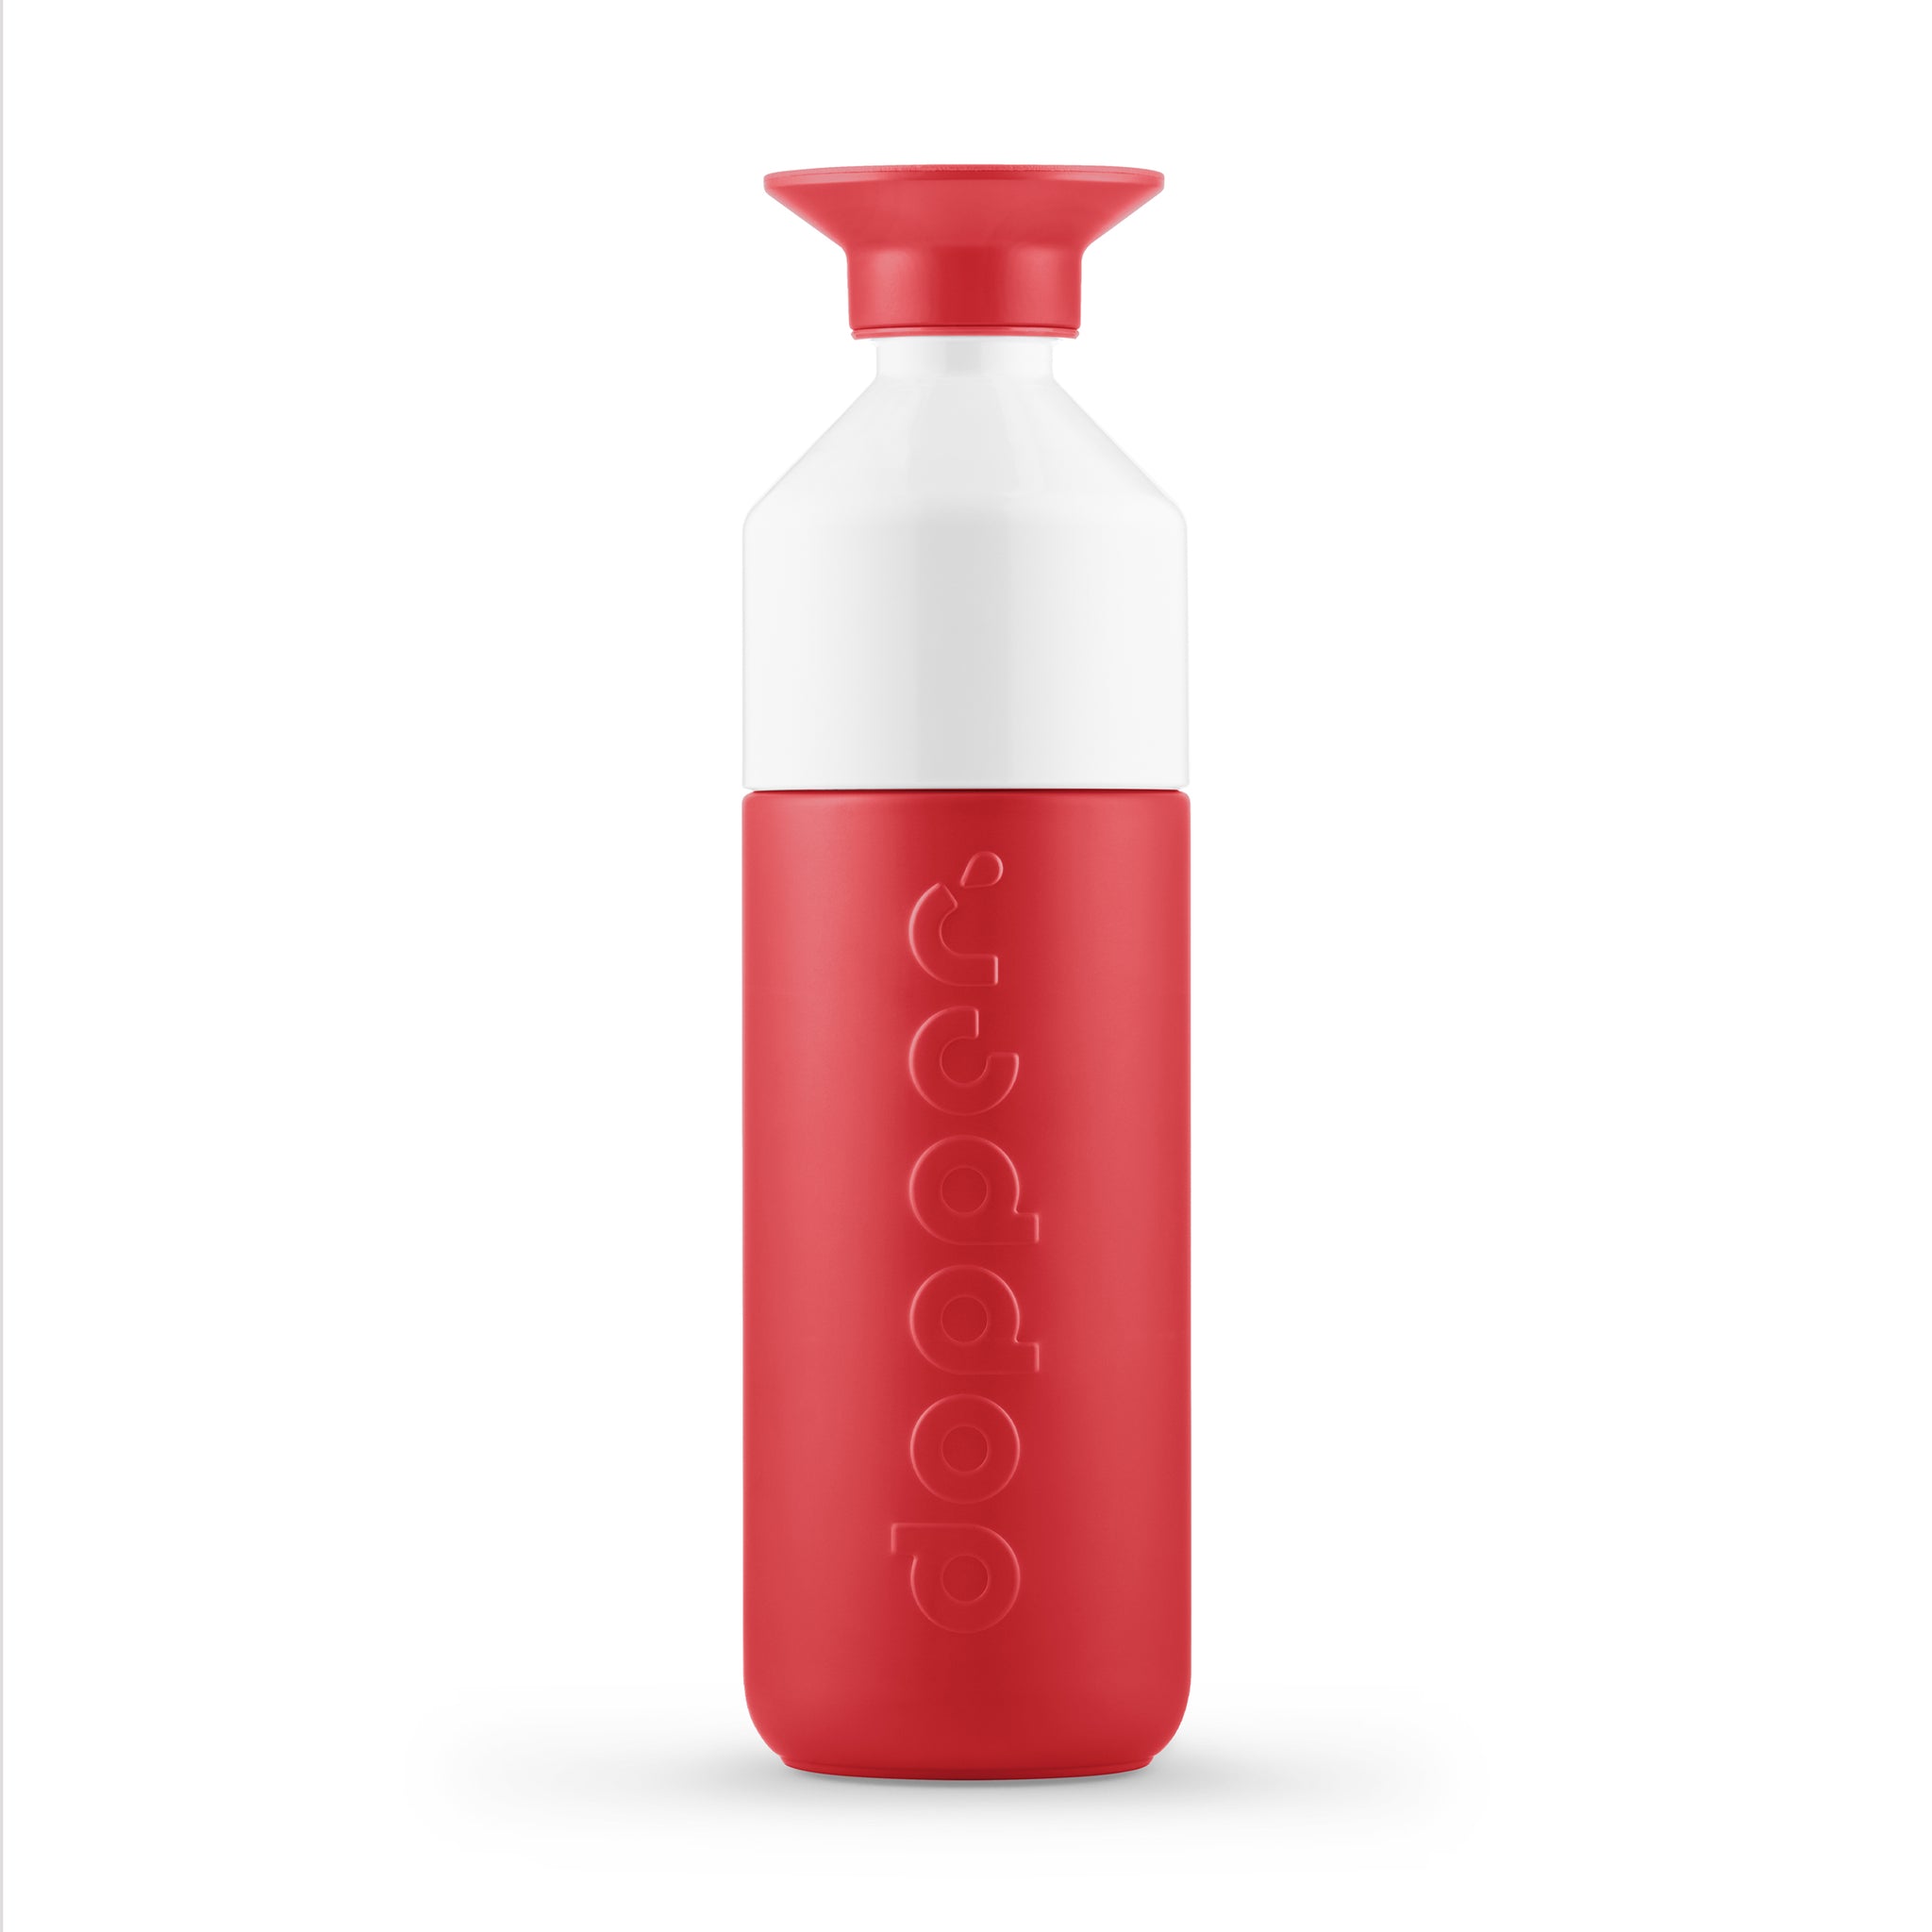 Dopper Insulated large Deep Coral│Thermosfles 580ml Rood│voorkant met witte achtergrond